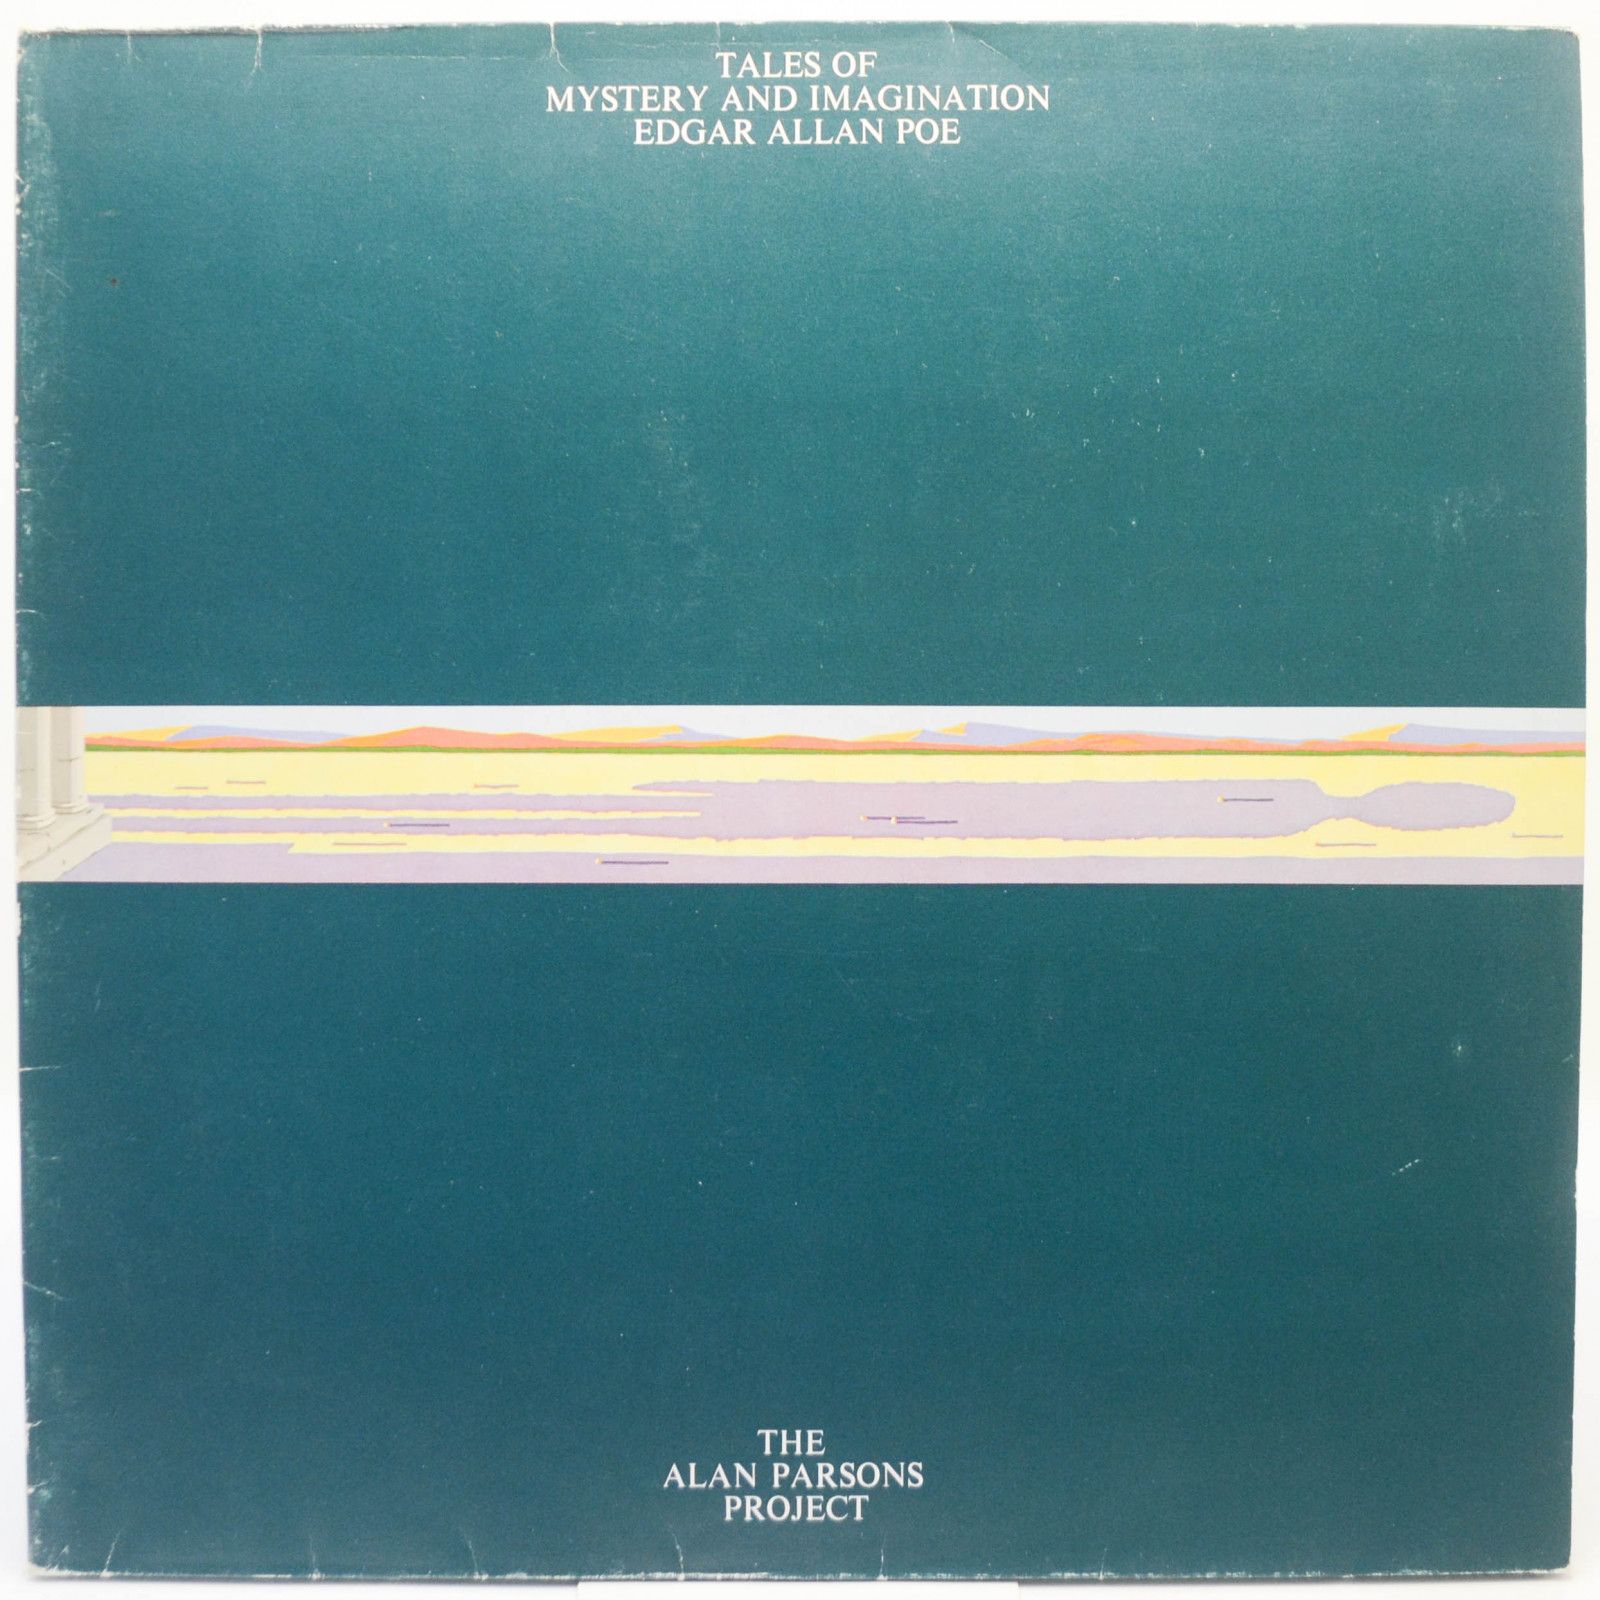 Alan Parsons Project — Tales Of Mystery And Imagination (booklet ), 1976